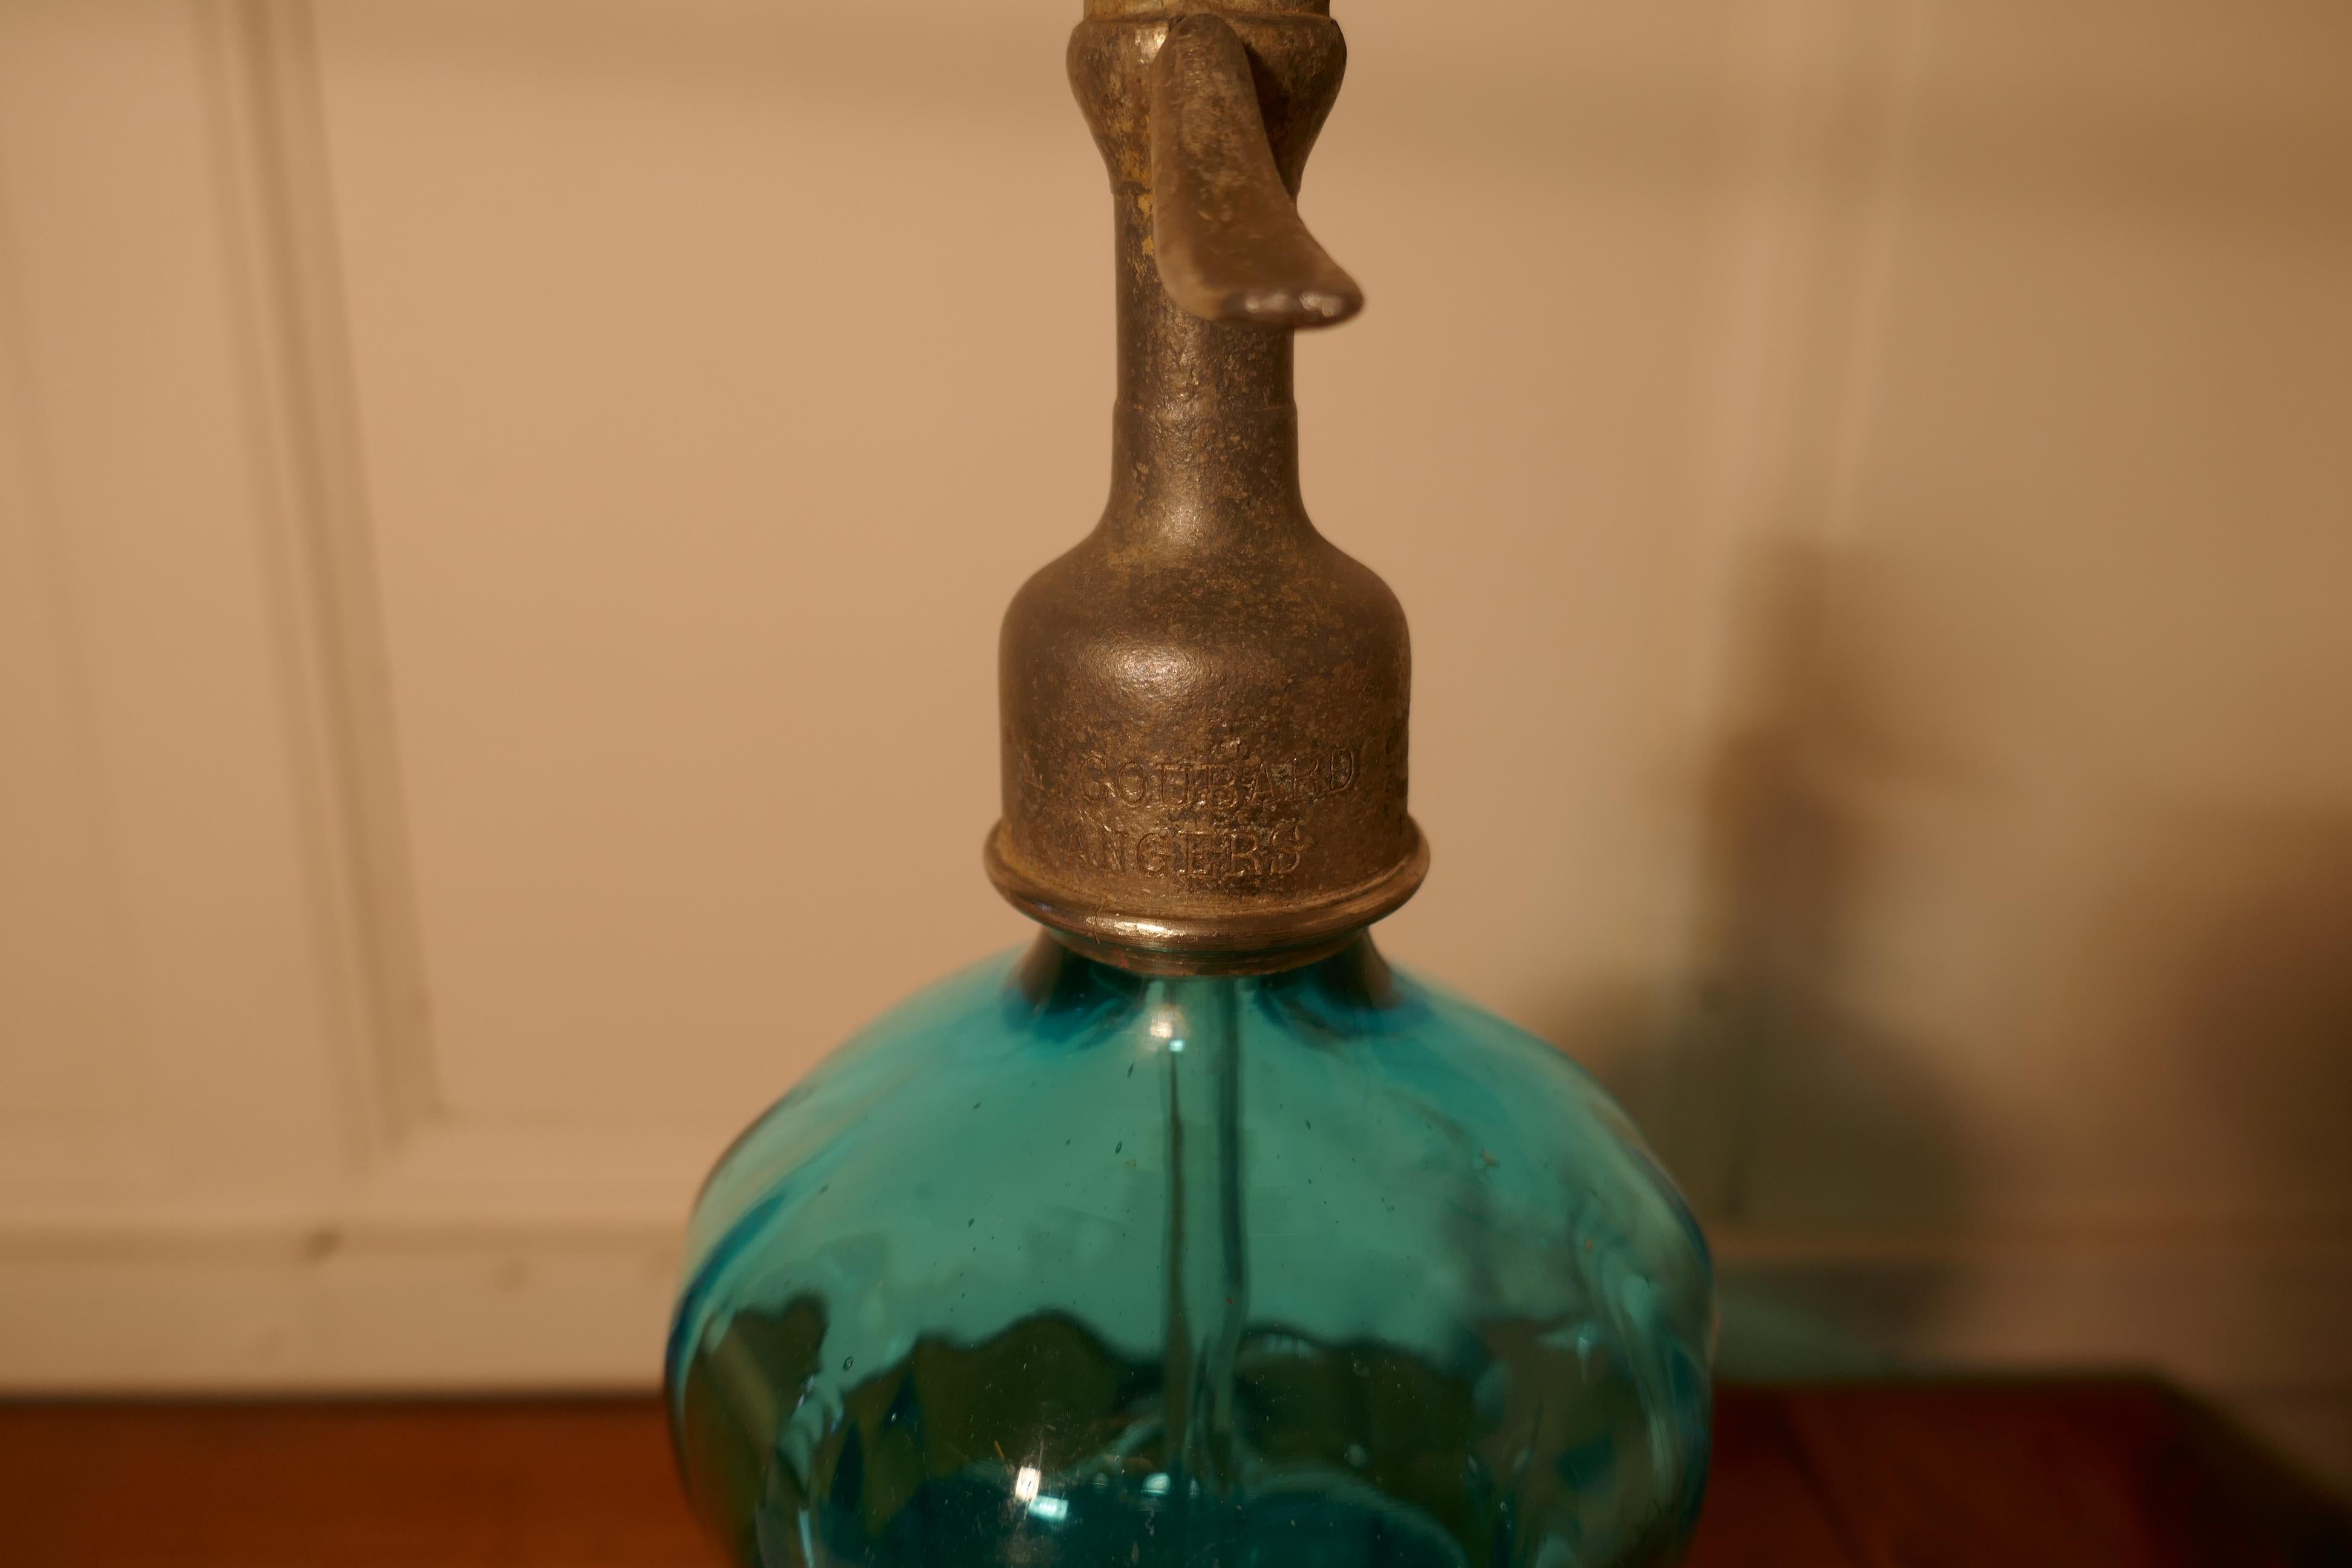 Antique French soda syphon blue glass from Angers, Loire.

Great looking piece
Blue glass etched writing

EAUX GAZUSES
E TOUBARD
ANGERS

Also stamped to trigger. 
Full size and superb thick blown glass waisted shaped with a chip to the